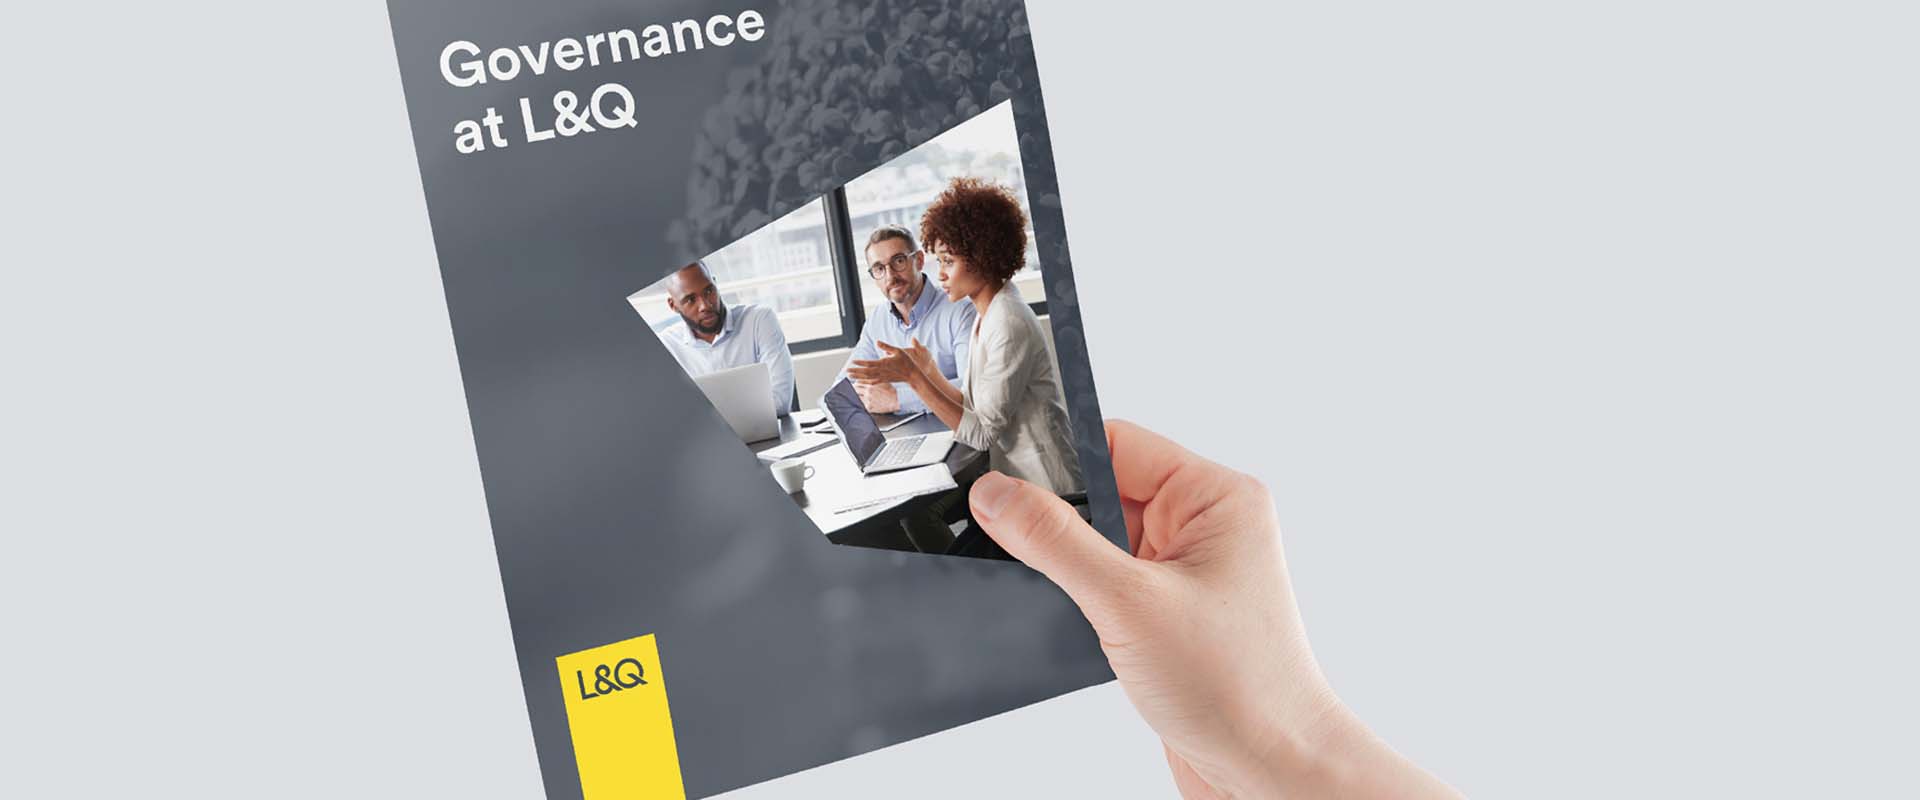 The front cover of L and Q's Governance Report